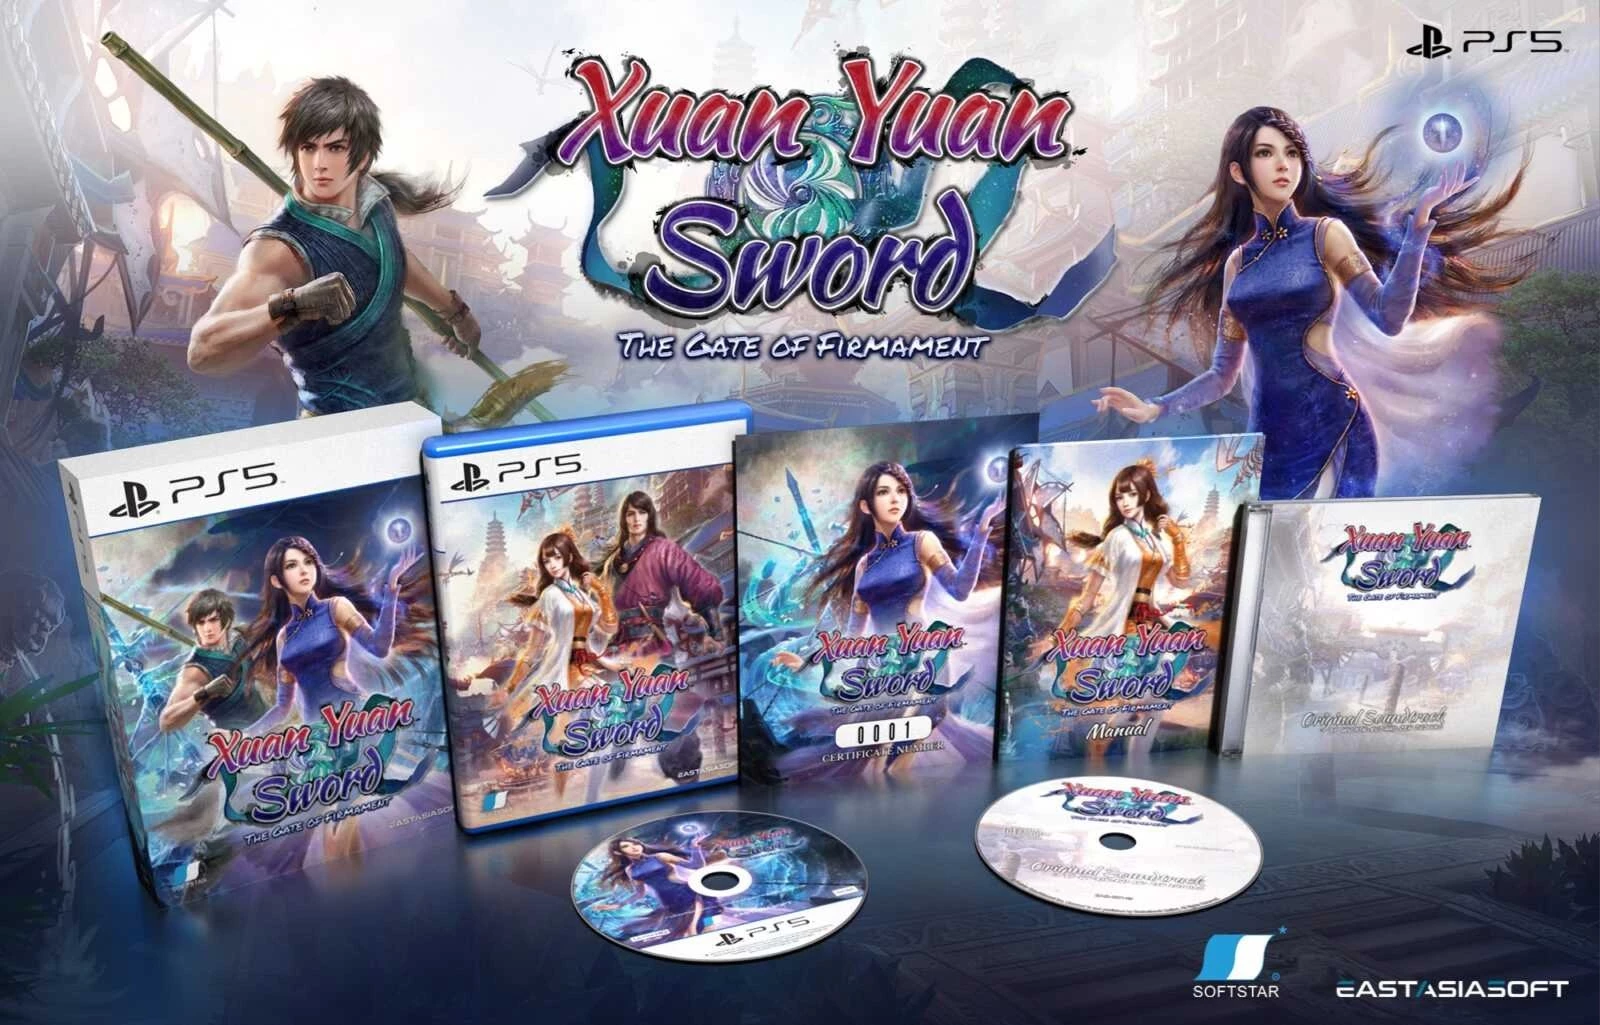 Xuan Yuan Sword: The Gate of Firmament - Collector's Edition (Asia Import) (PS5), EastAsiaSoft